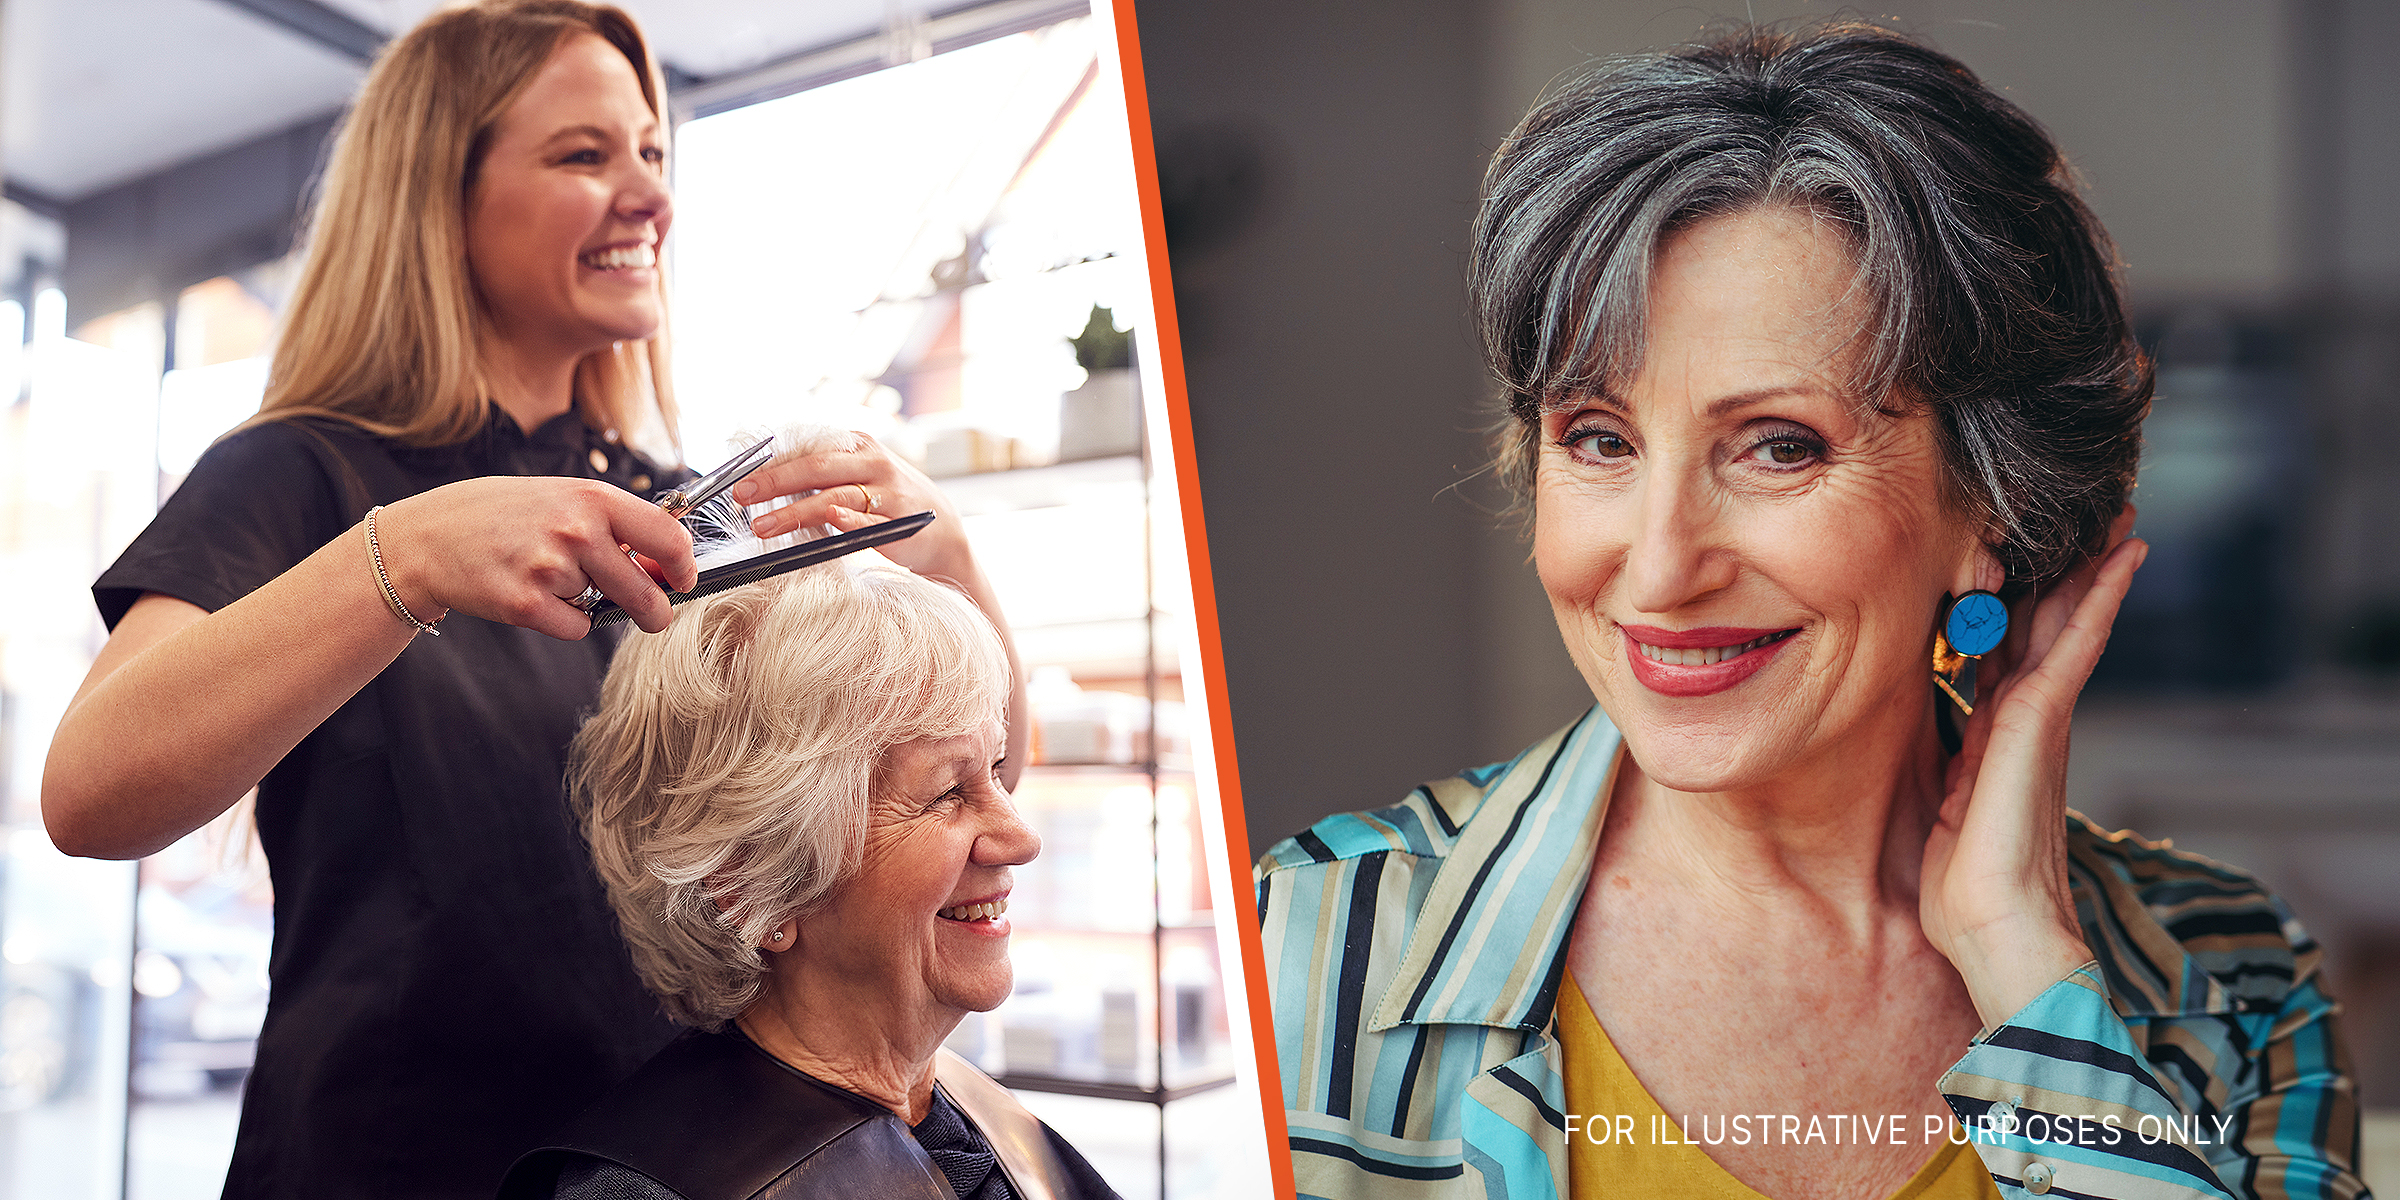 Hairdresser and older woman | Beautiful older woman | Source: Shutterstock